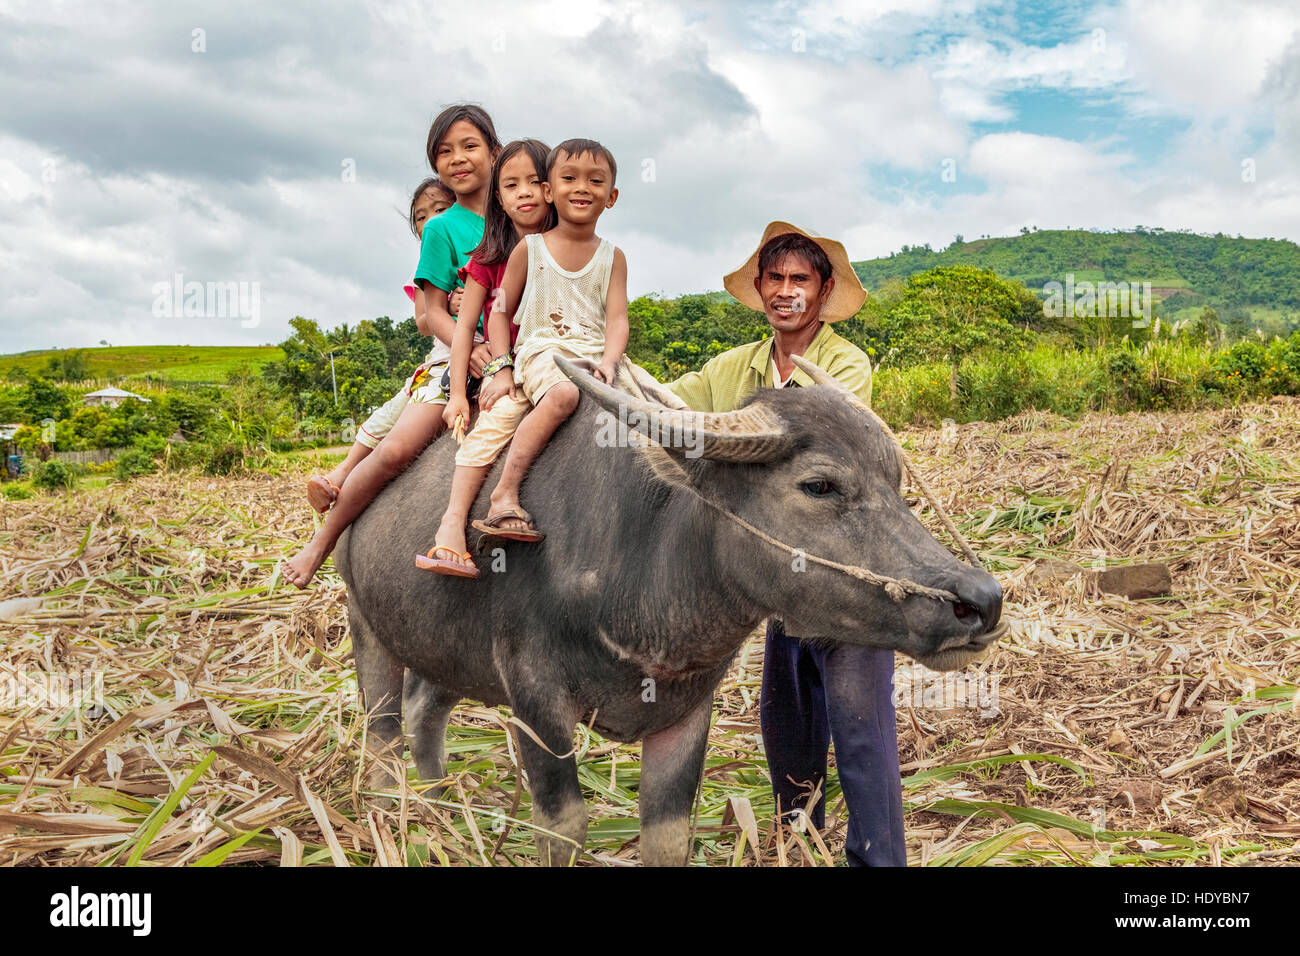 Filipino children ride on the back of their father's carabao, water buffalo, in Ma'ao, Negros Occidental Island, Philippines. Stock Photo